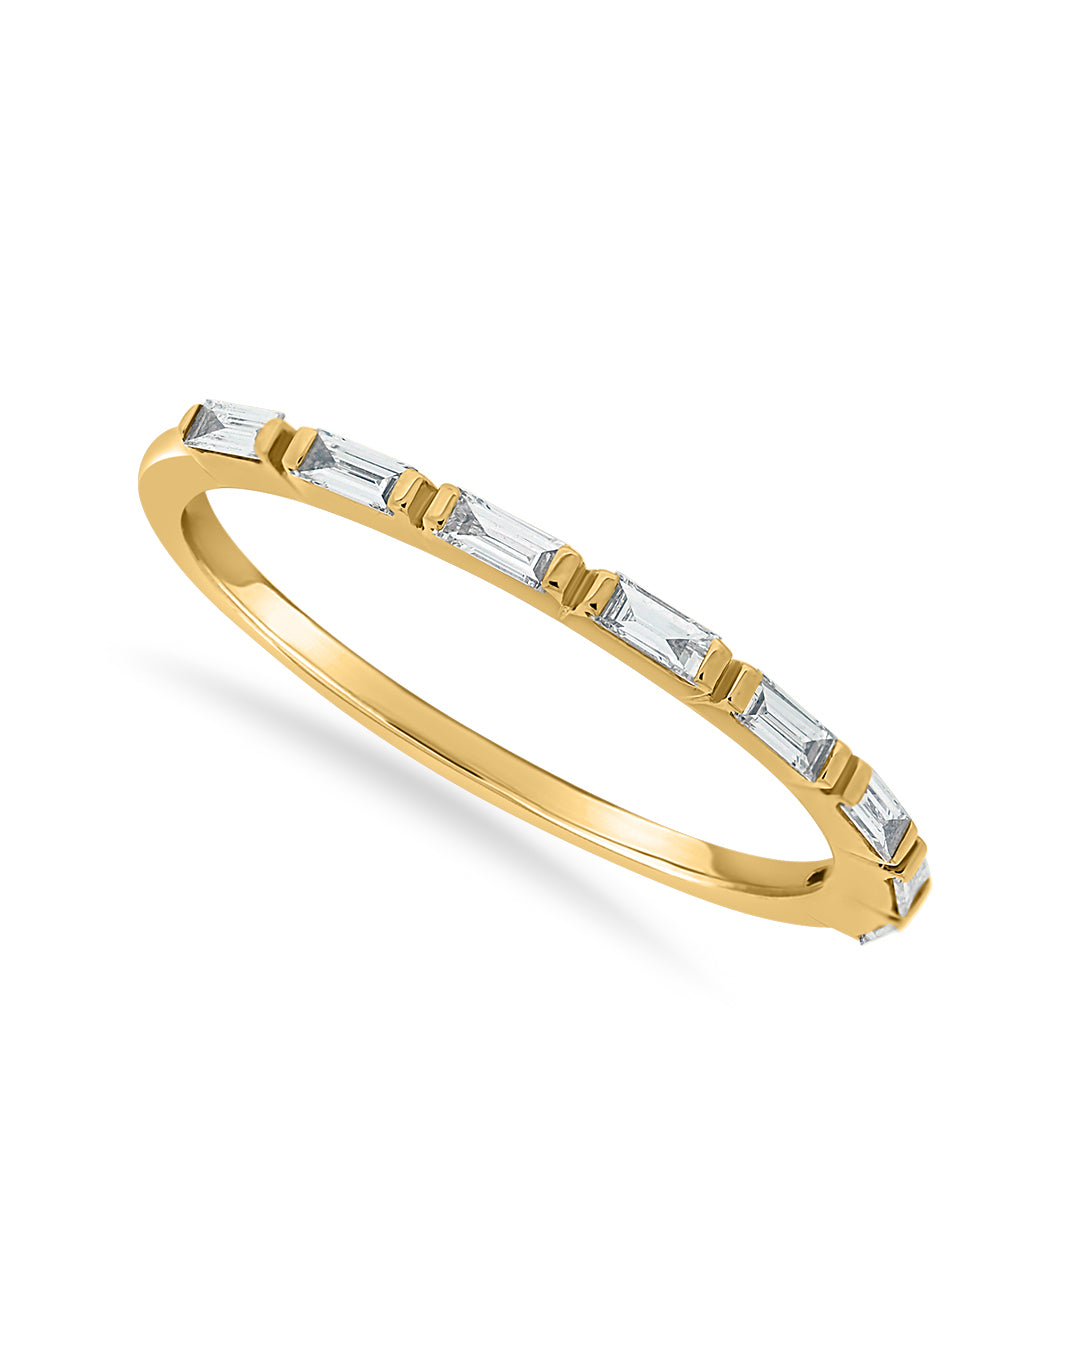 Dax Baguette Diamond Stacking Ring